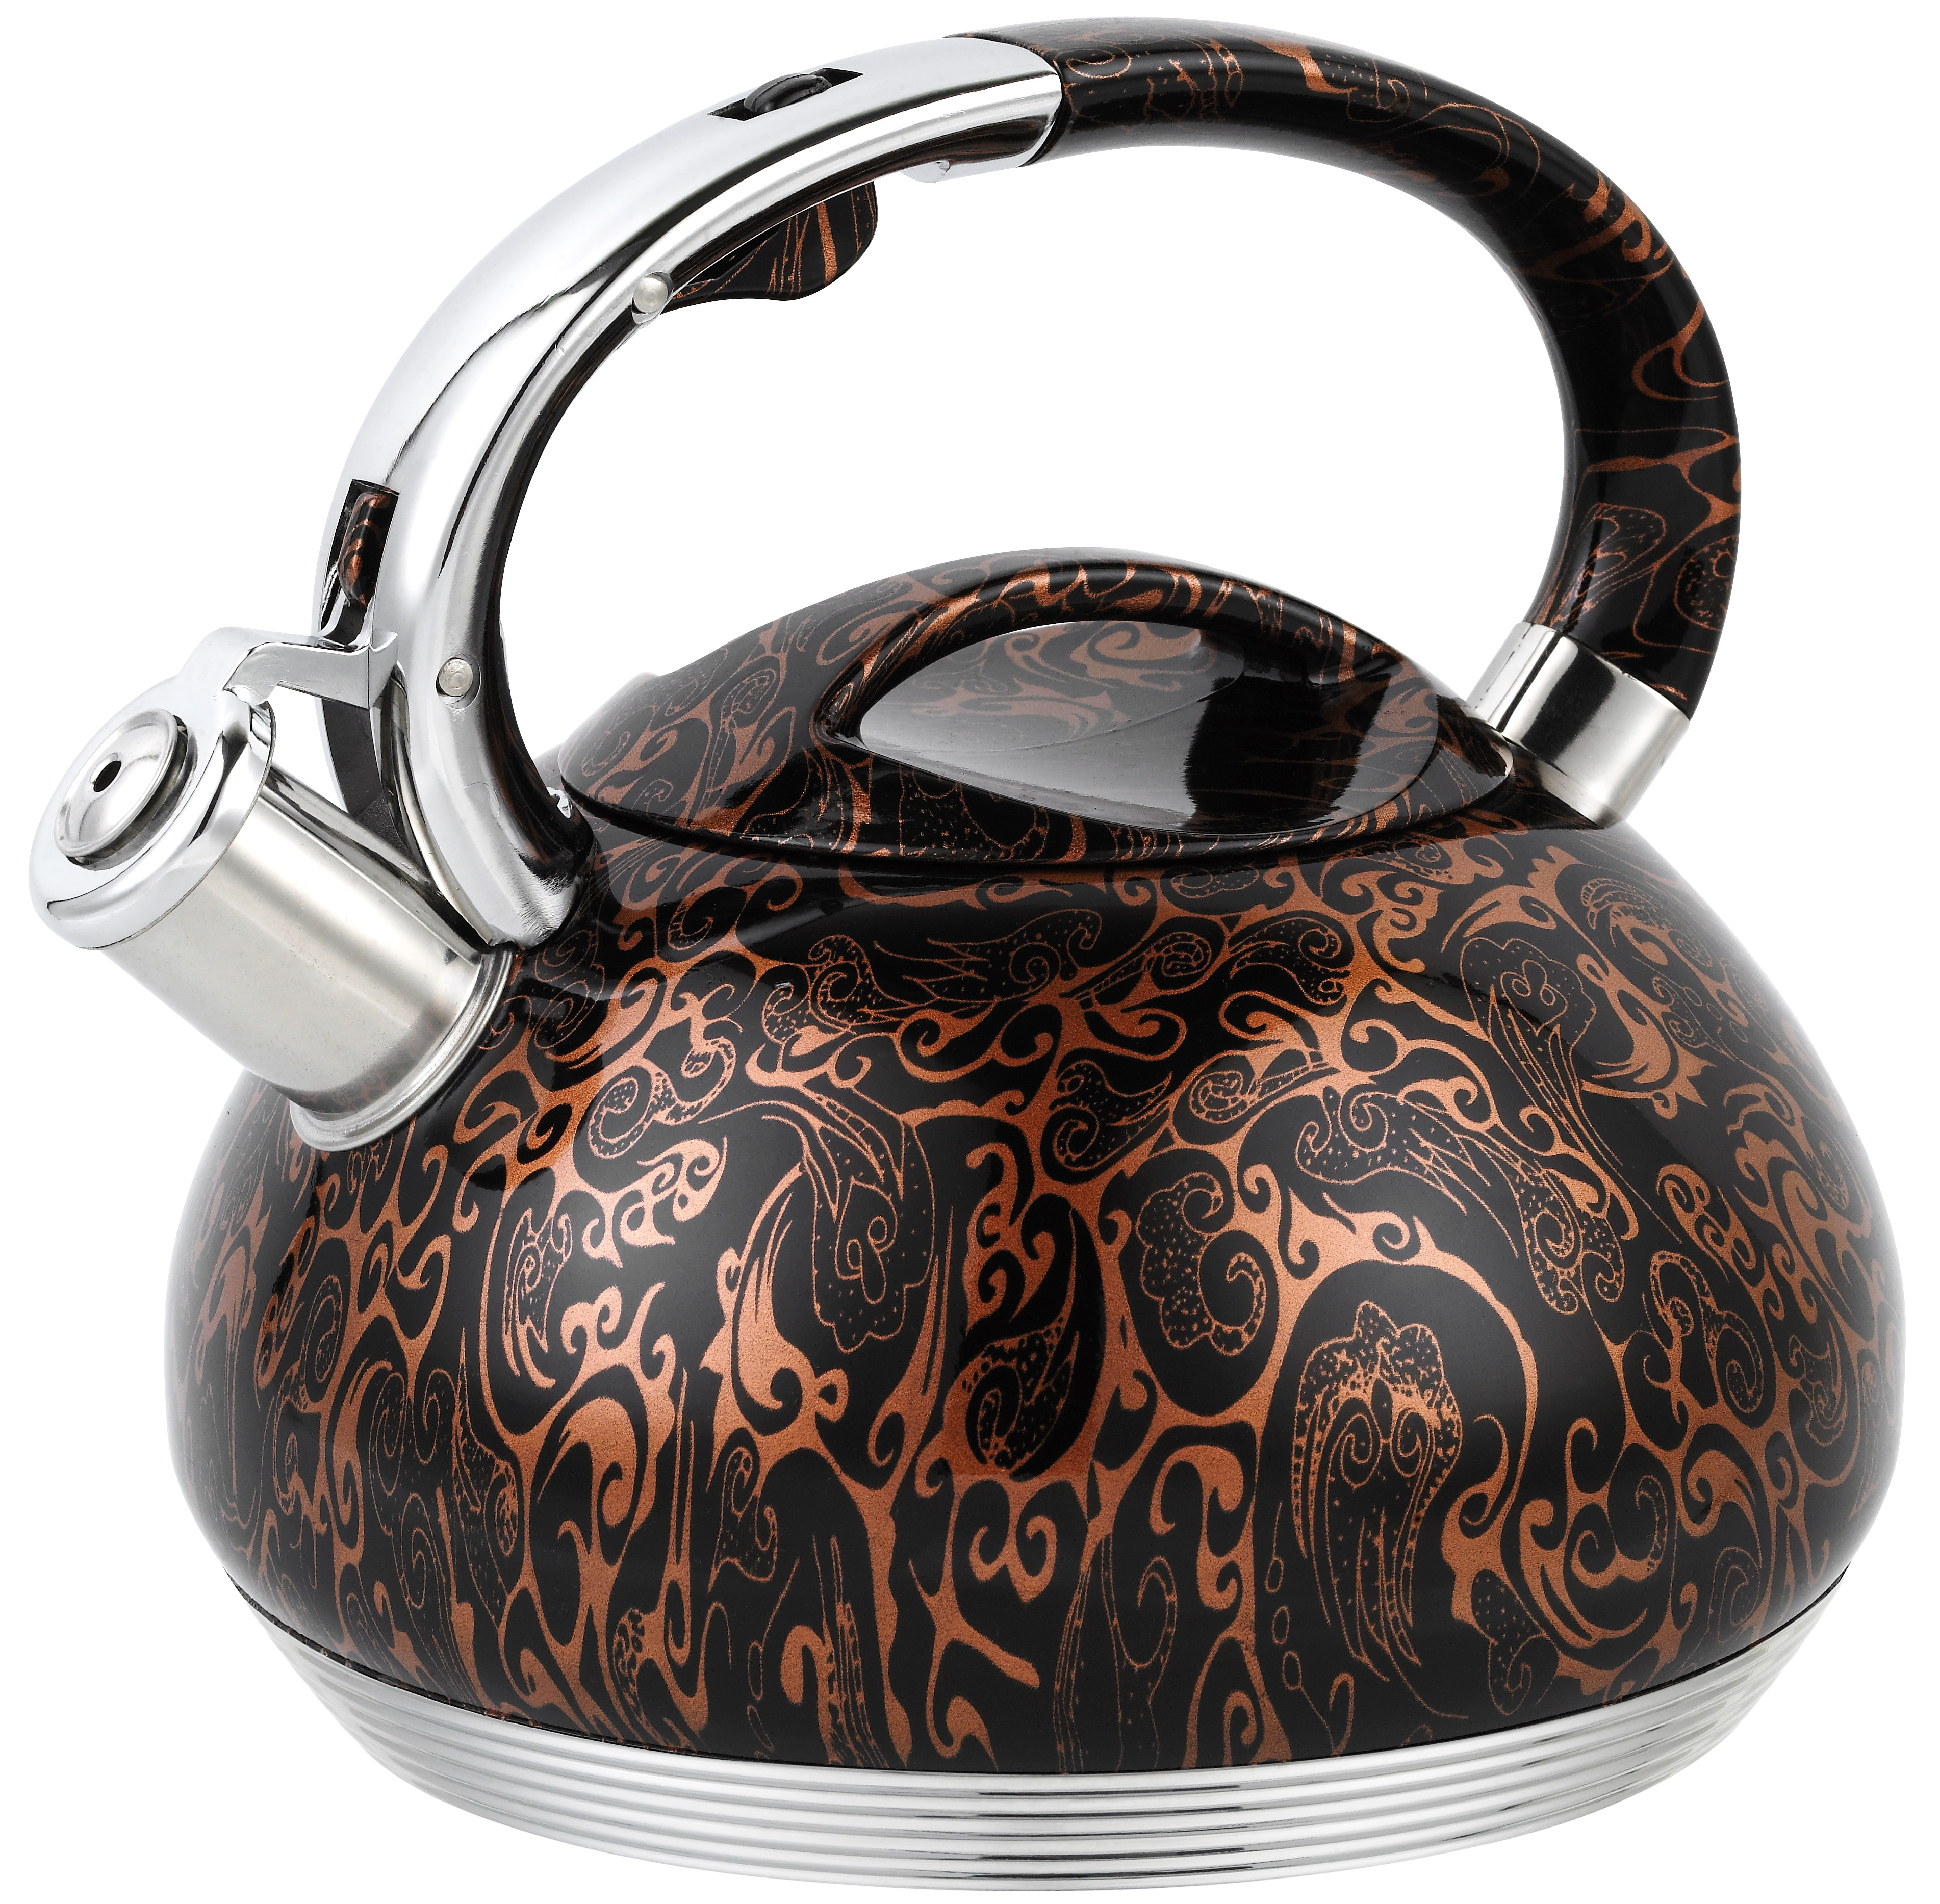 Whistling Tea Kettle Tea Pot Customized Color Stainless Steel Hot Water Teapot for ALL Stovetop